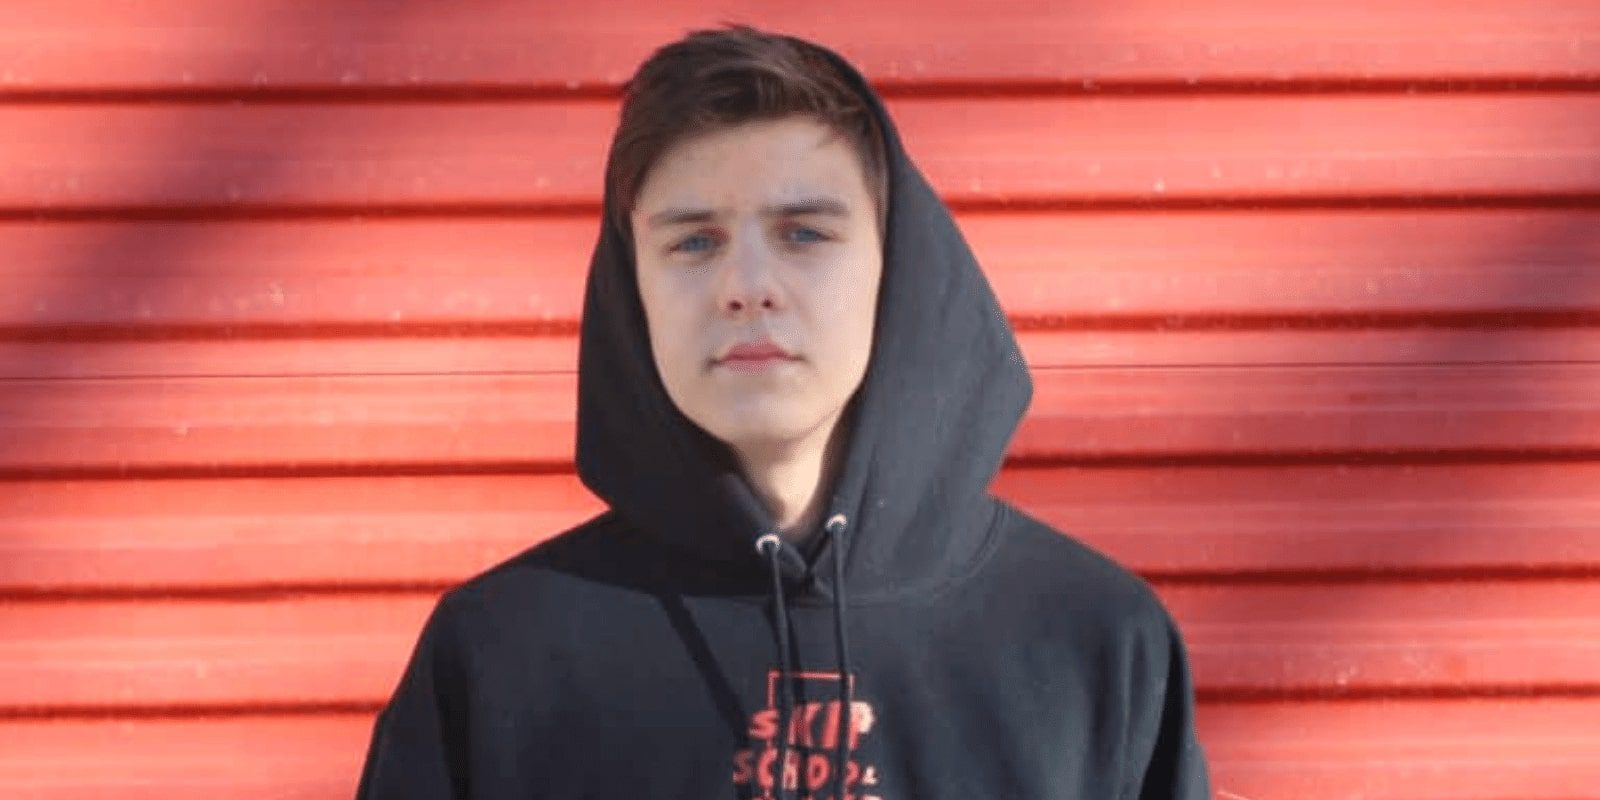 A teen boy wearing a hoodie against red wall